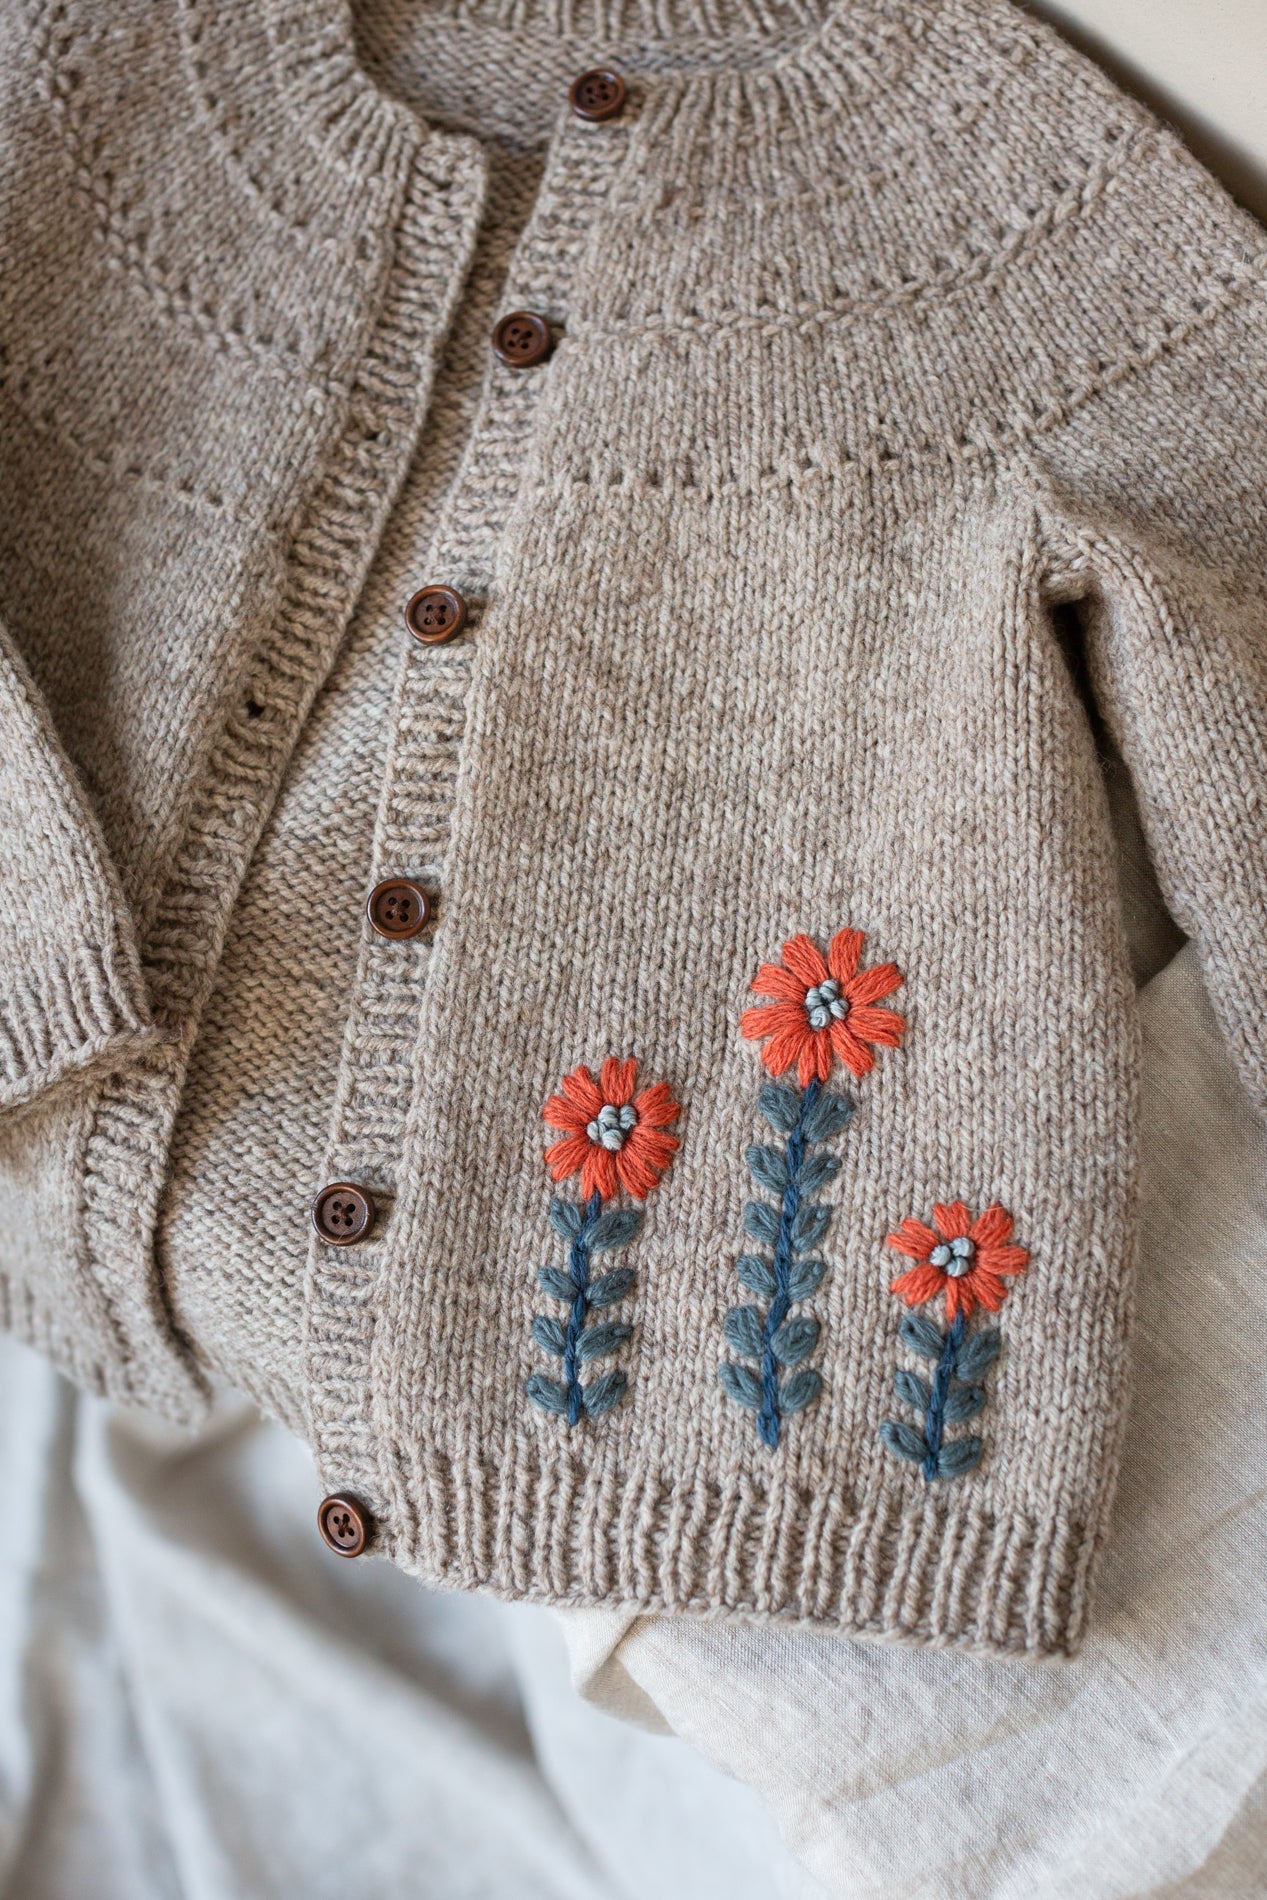 How to Embroider on Knitted or Crocheted Items